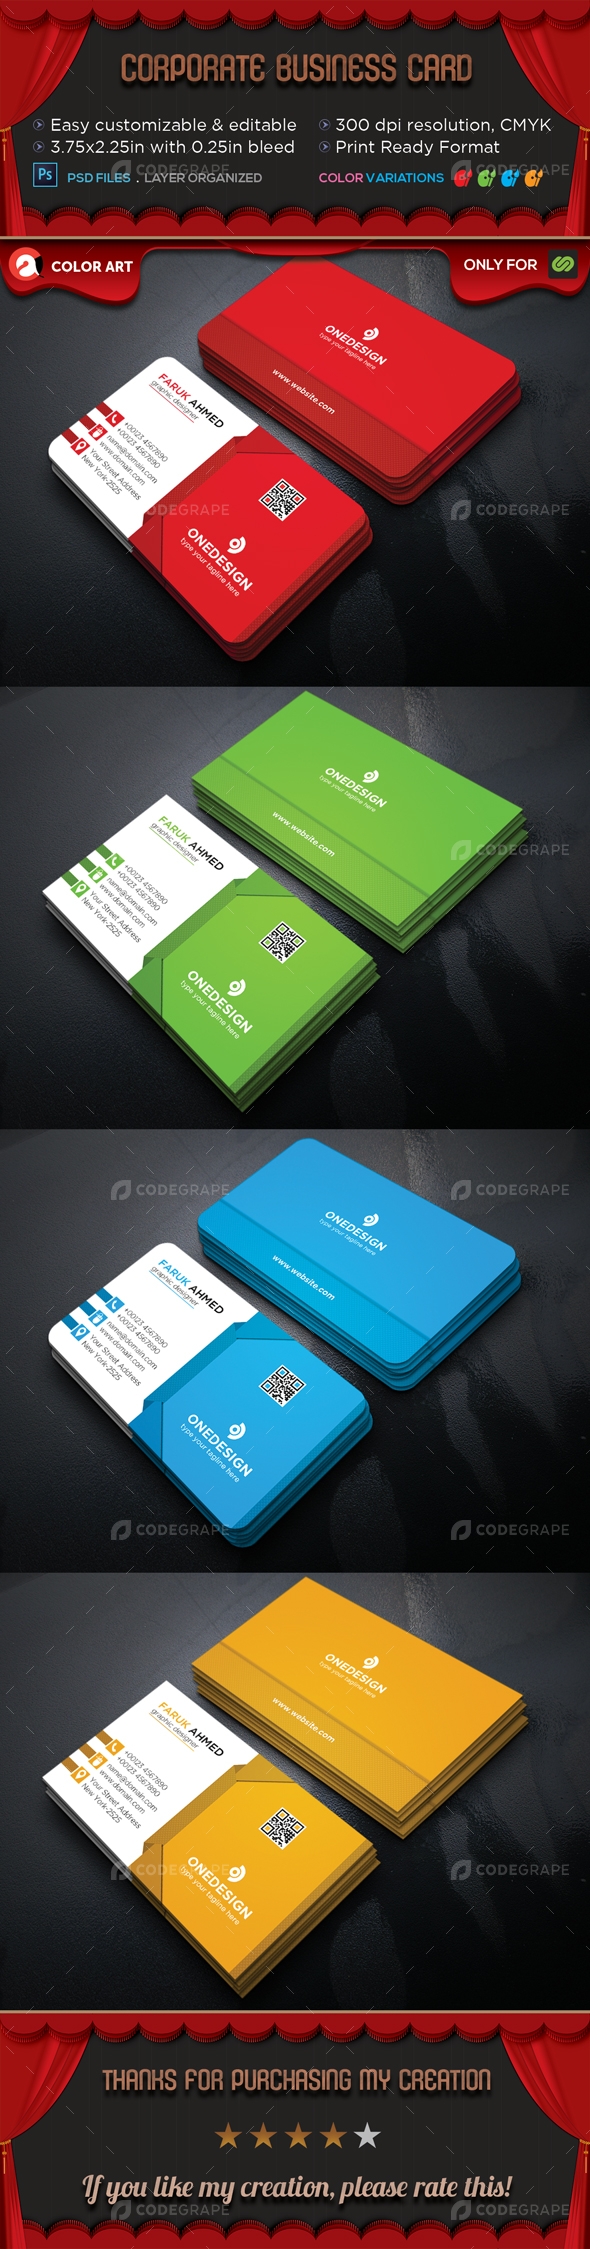 Corporate Business Card V.6